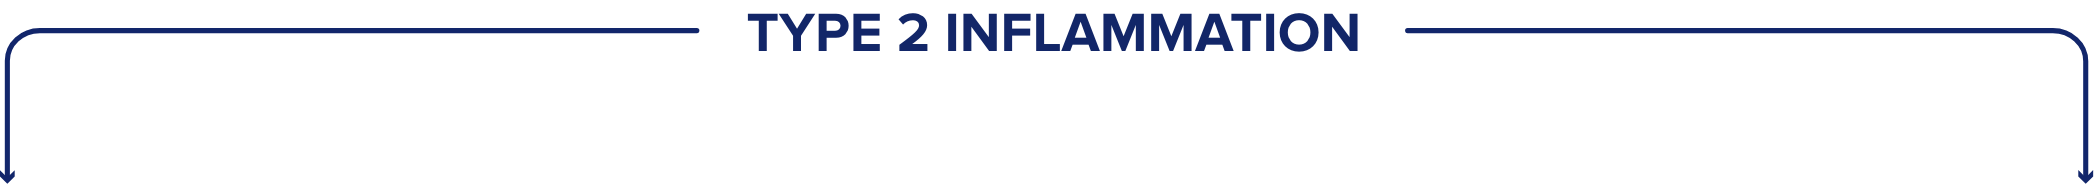 TYPE 2 INFLAMMATION